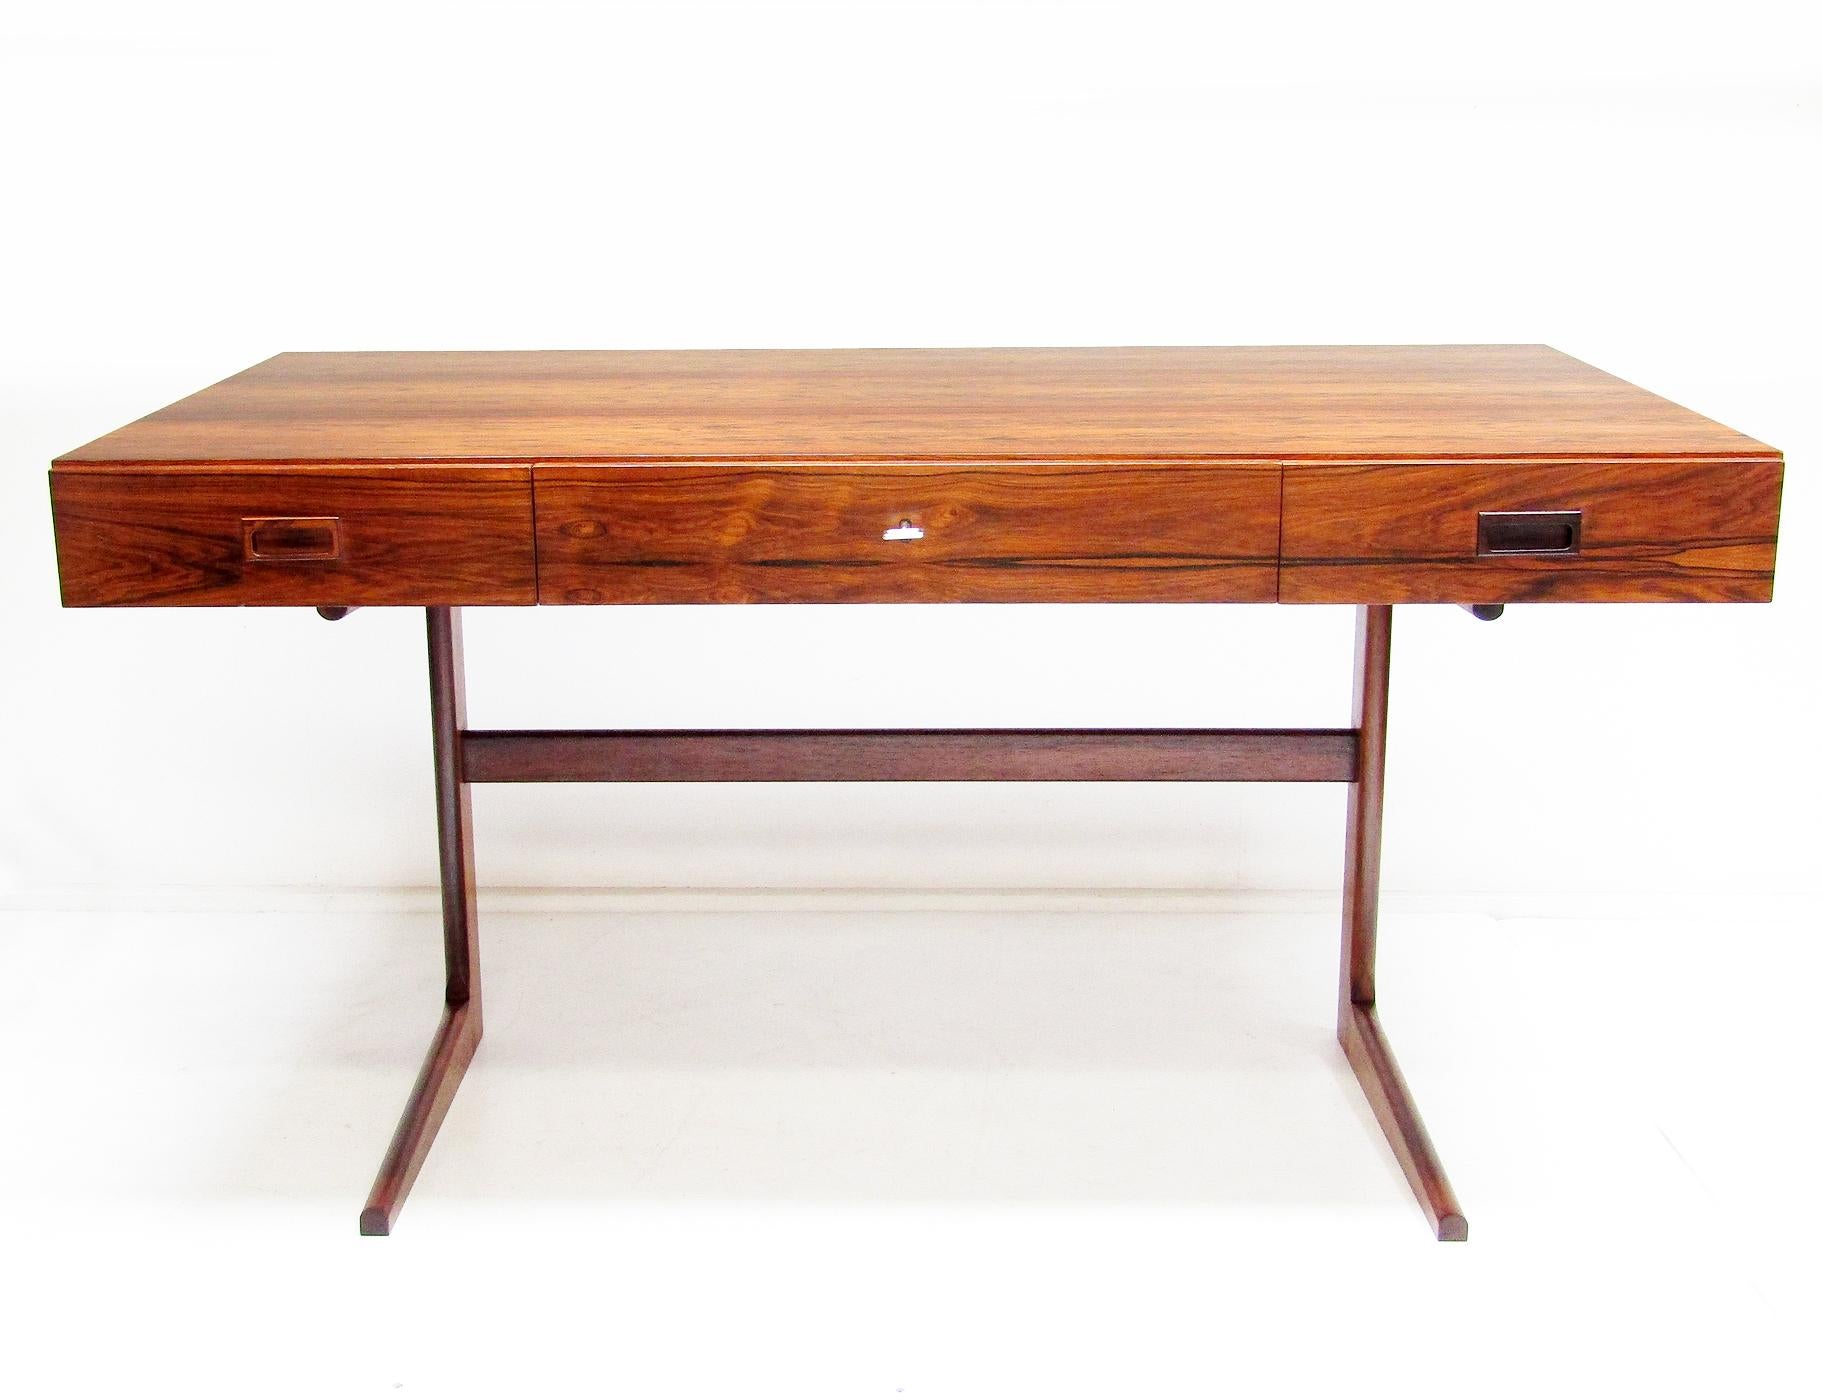 A stunning cantiliver desk in Rio rosewood by Danish designer Georg Petersens.

This sleek desk is similar in style to Nanna Ditzel or Bodil Kjaer's iconic designs.

The rosewood veneer is in excellent condition. The figuring continues through